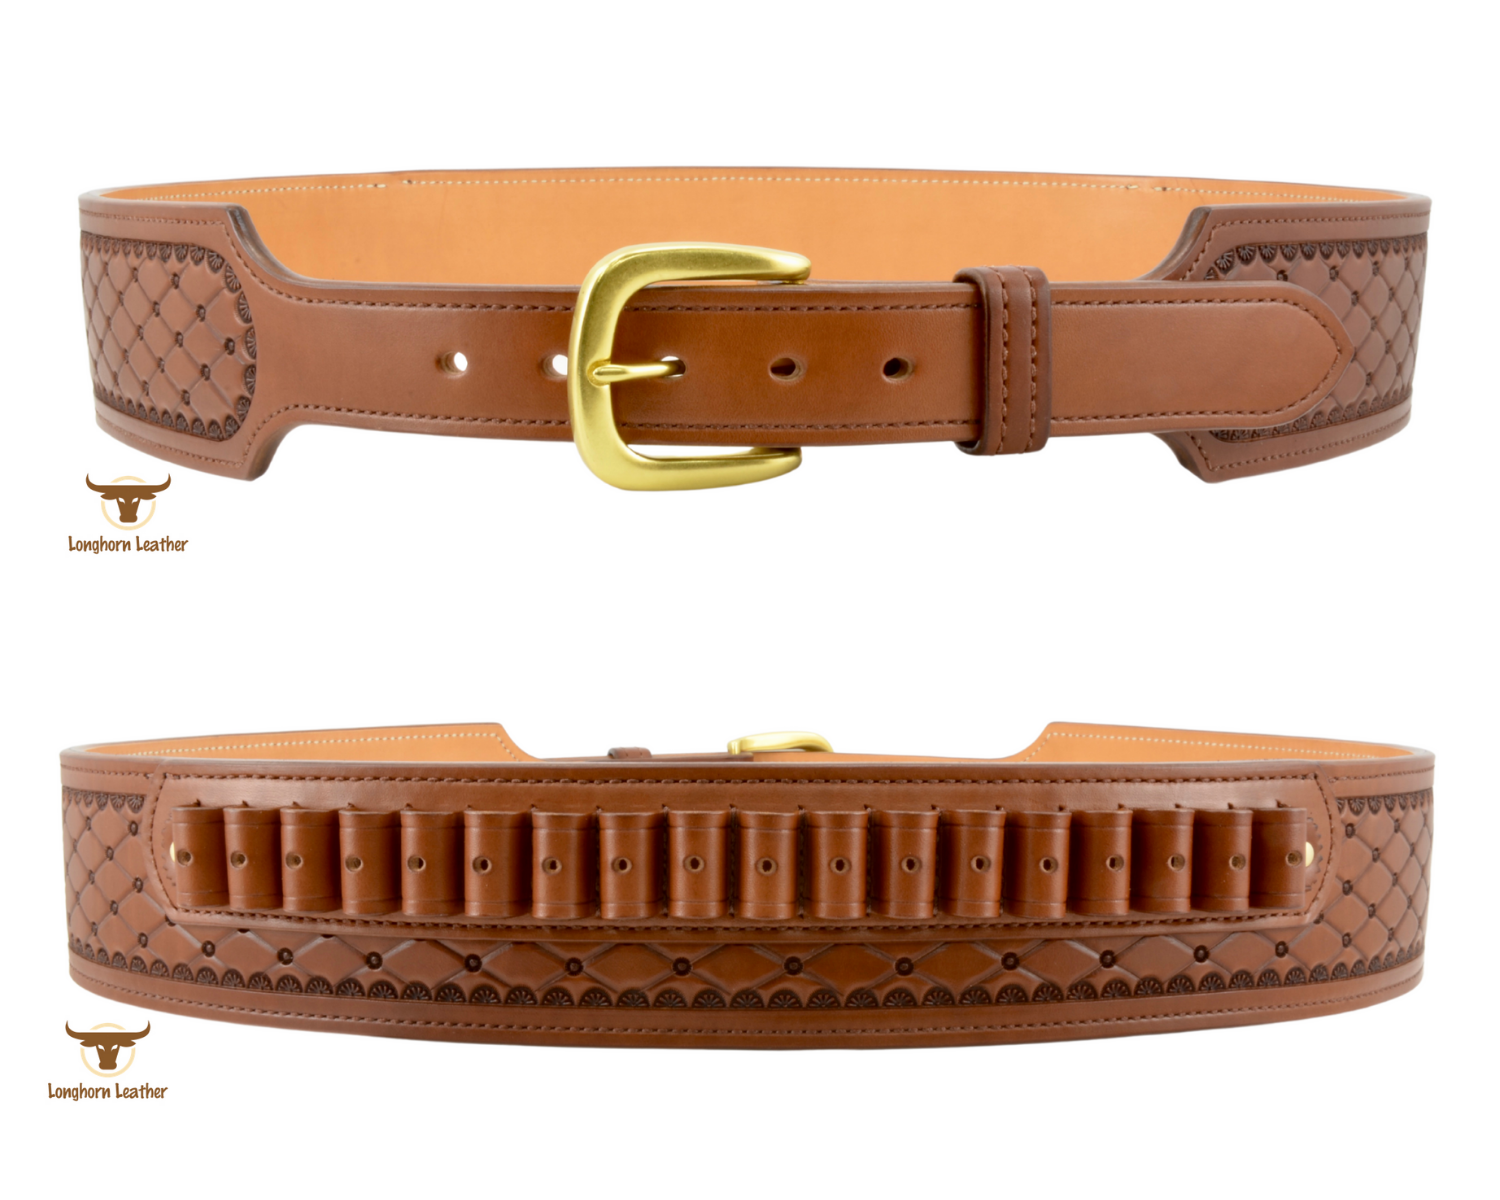 Custom leather cartridge belt featuring the "San Carlos" design.  Individually handcrafted at Longhorn Leather AZ.